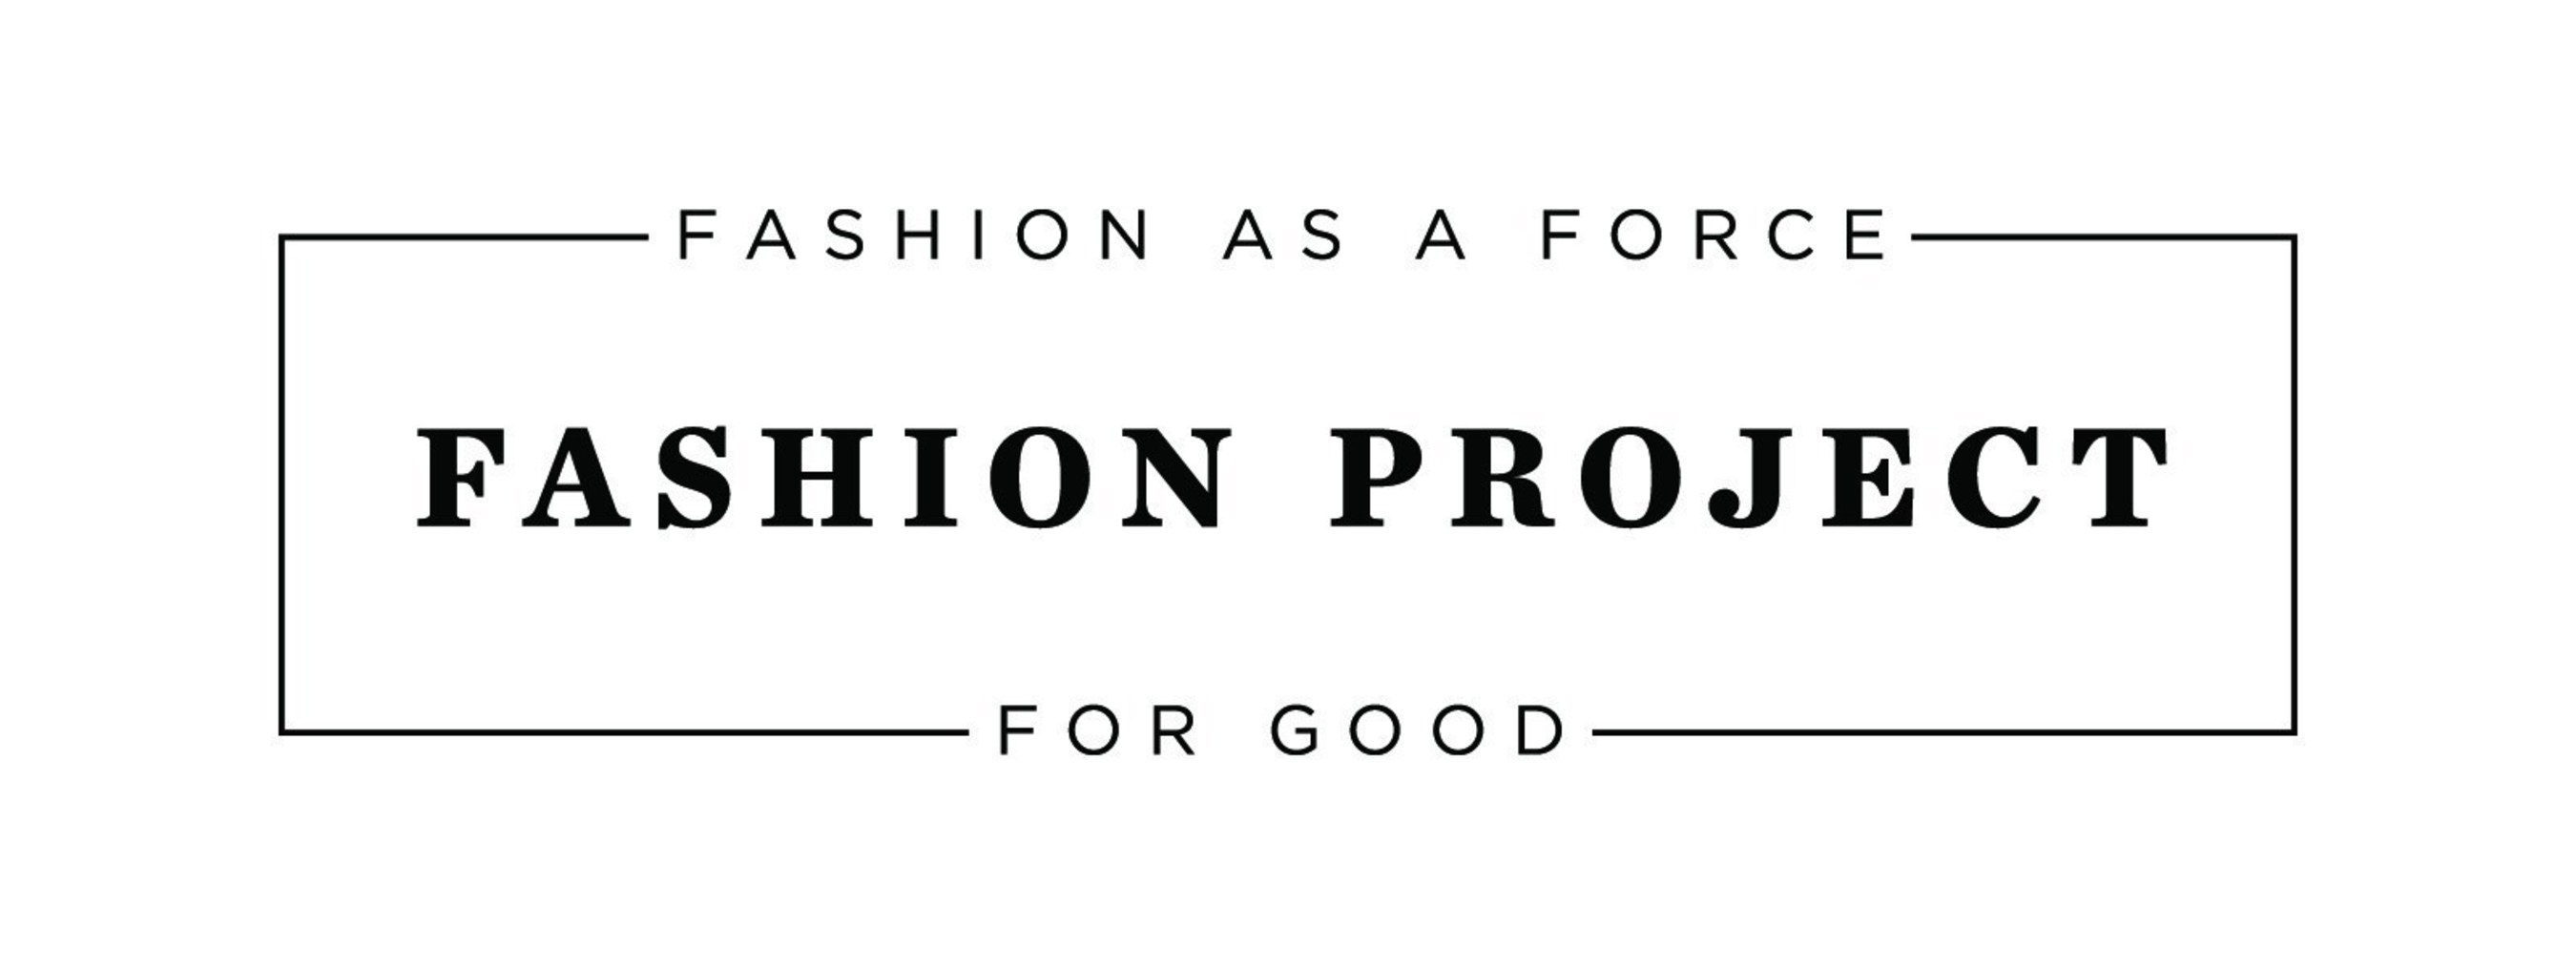 Fashion Project Launches Interactive Fundraising Platform to Connect Communities to Causes